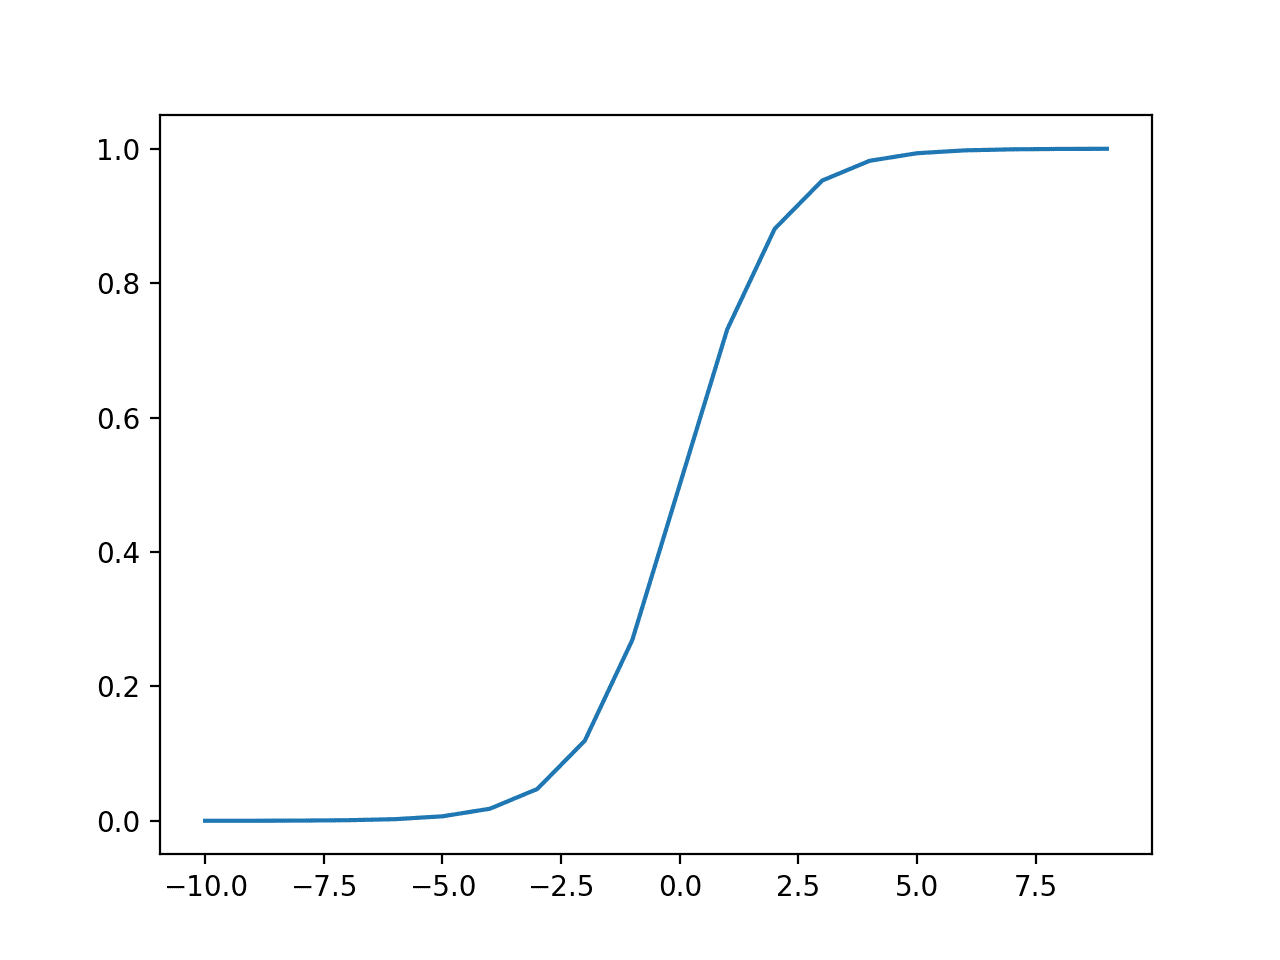 Plot of Inputs vs. Outputs for the Sigmoid Activation Function.